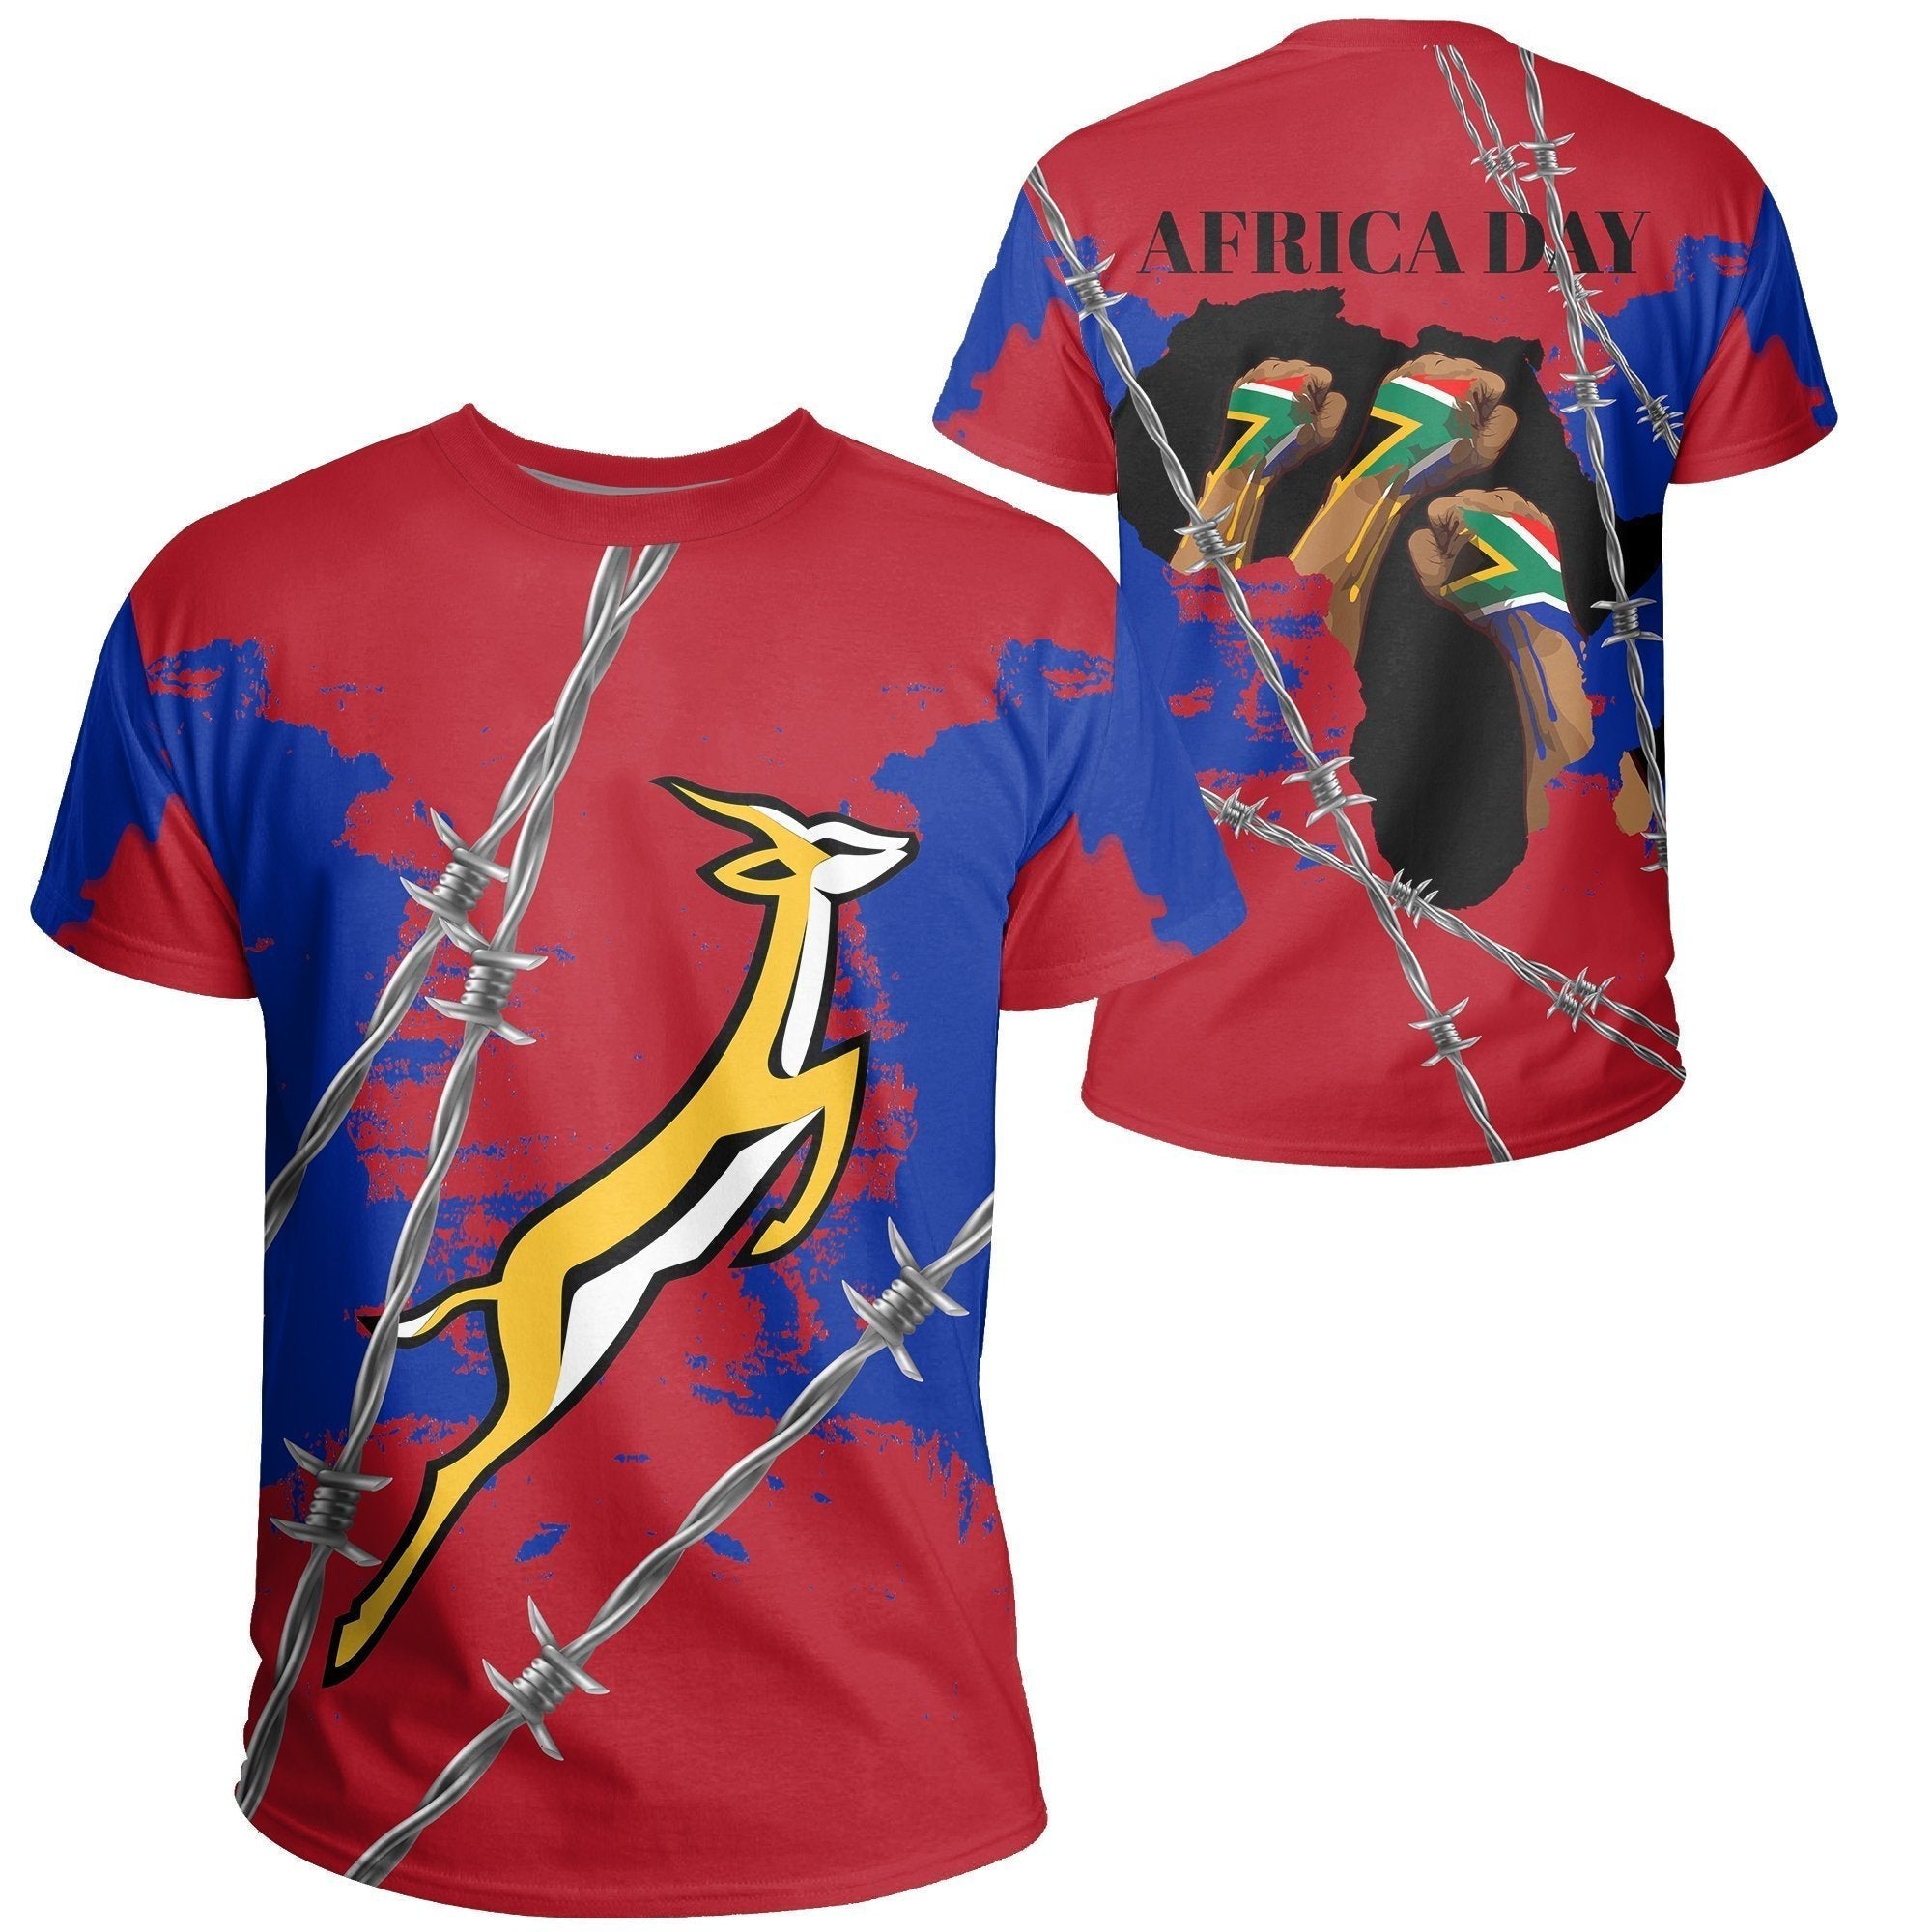 wonder-print-shop-t-shirt-south-africa-in-africa-day-red